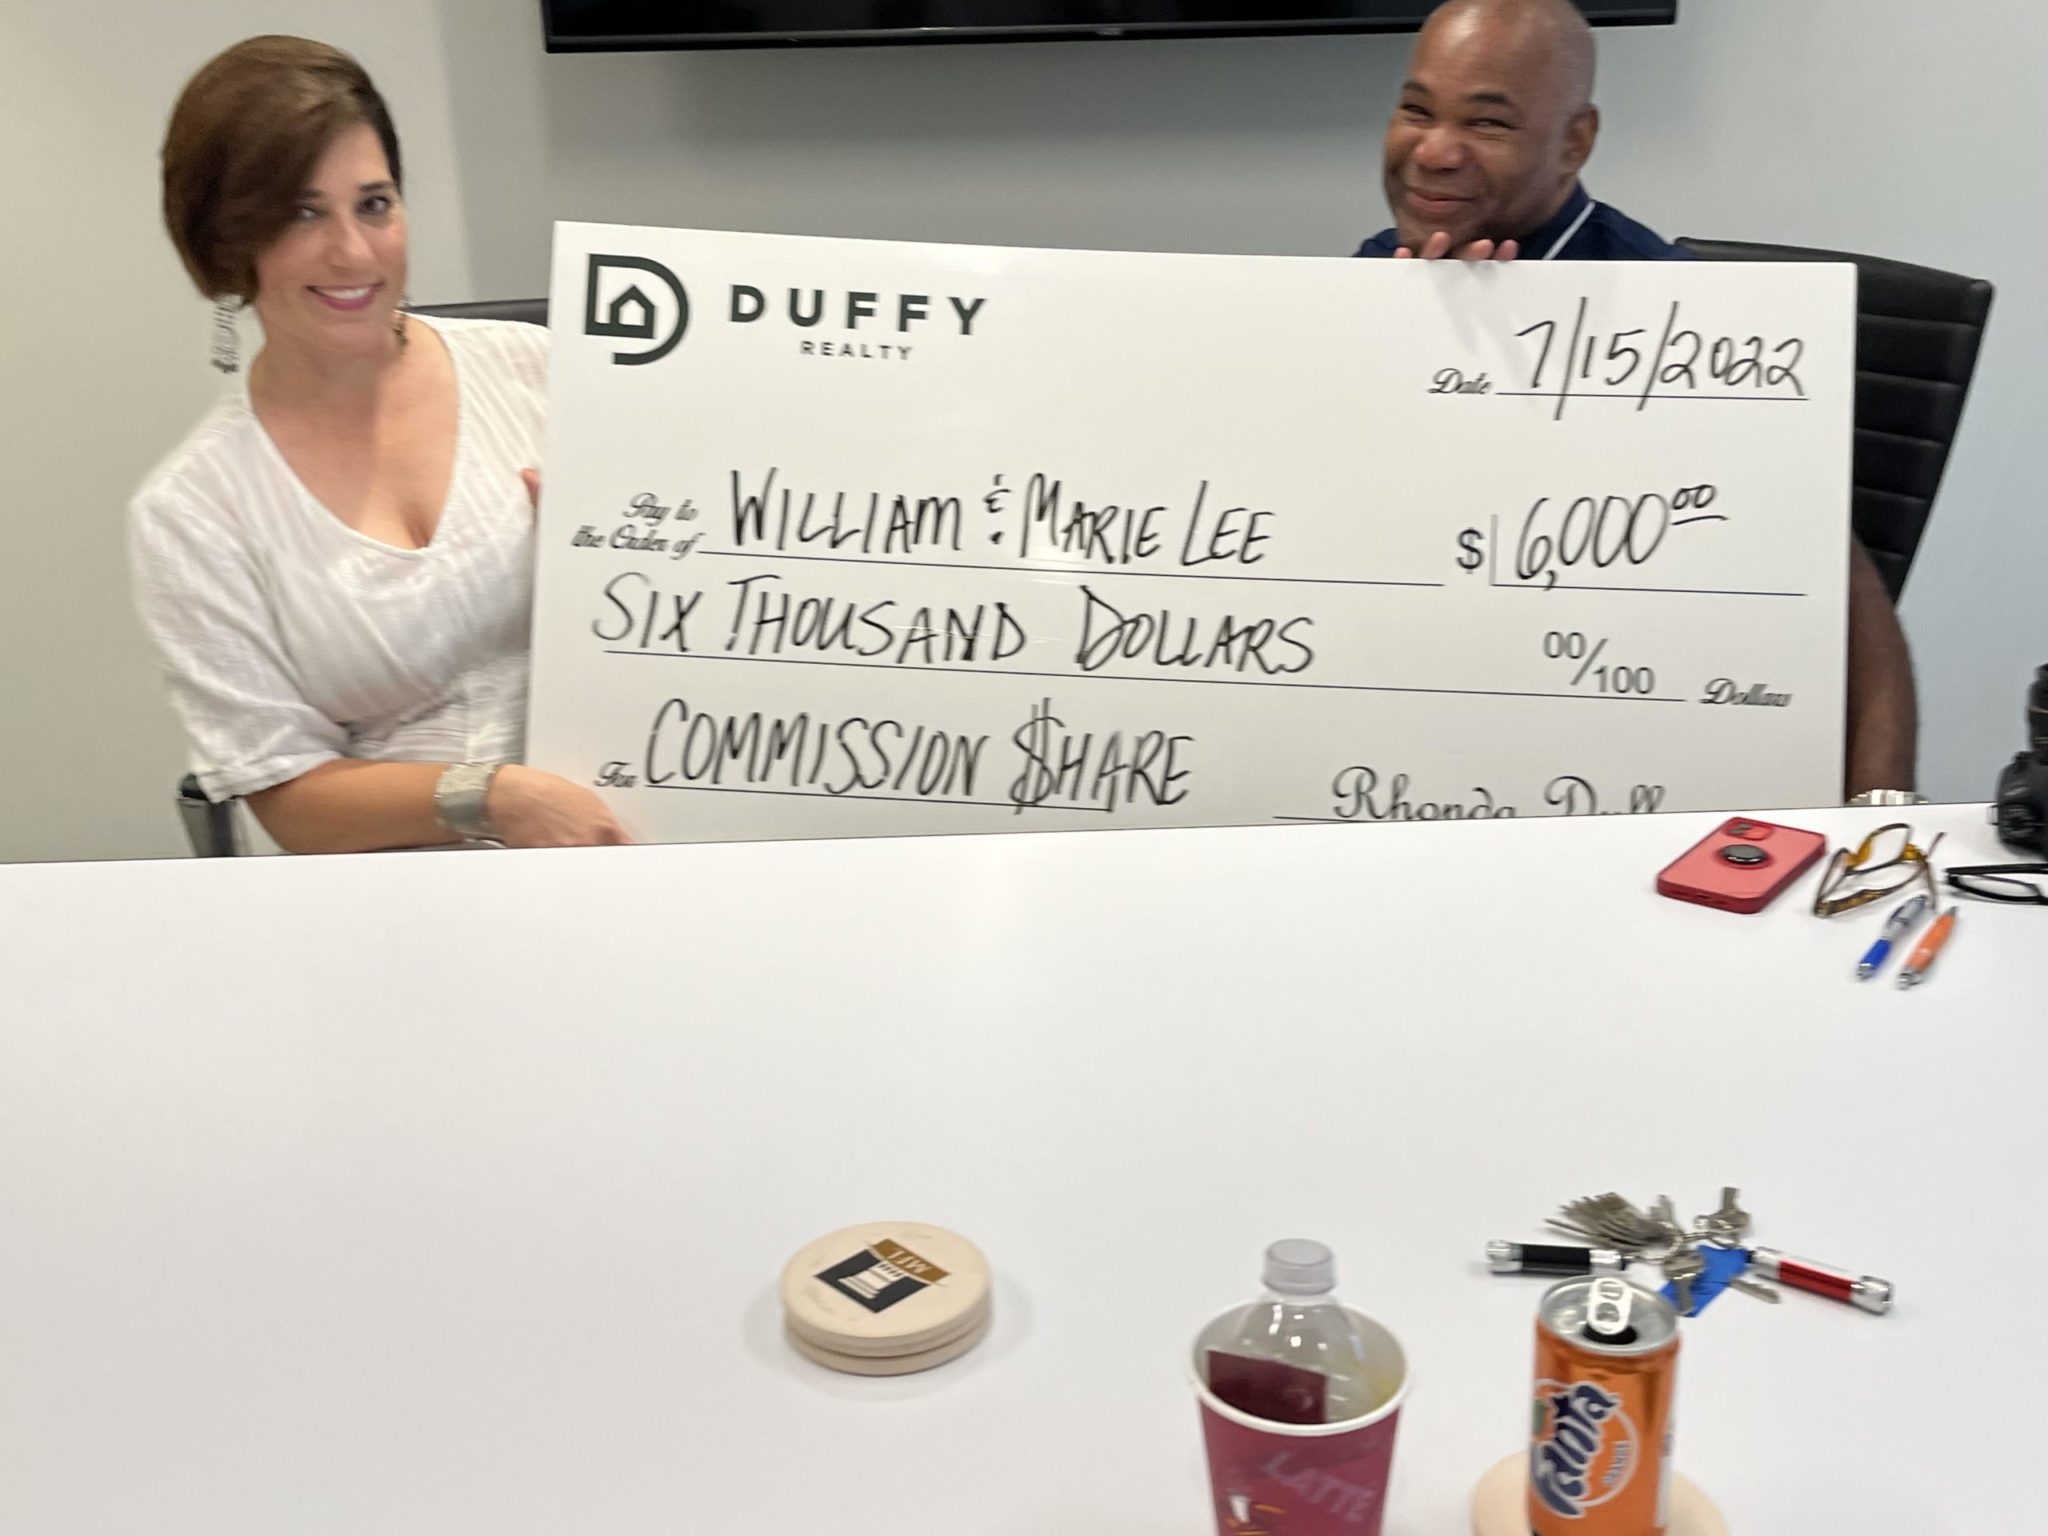 Buyer Lee Buys a Home in Hapeville and Gets $6000.00 of DUFFY’s Buyer Commission